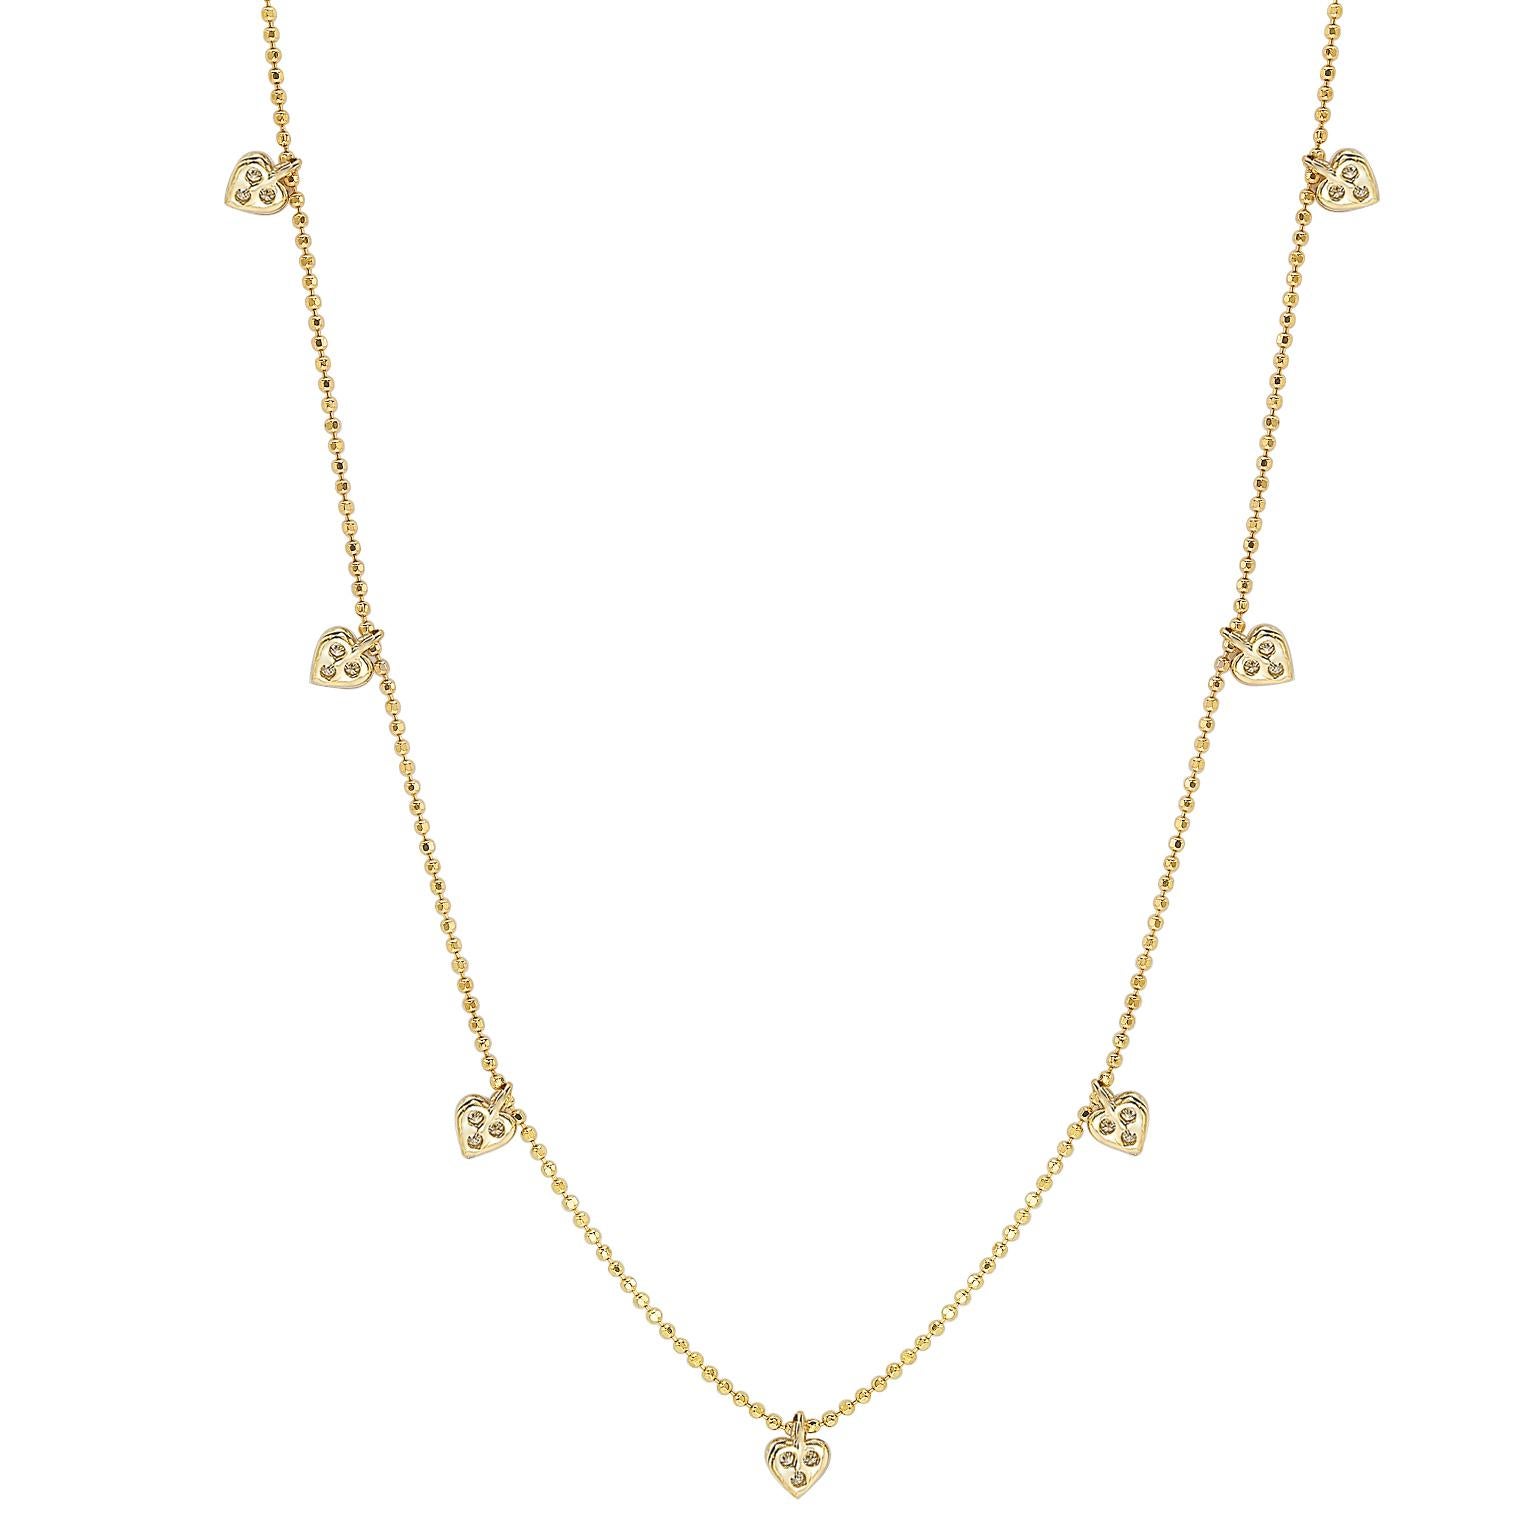 This unique Suzy Levian diamond station heart necklace displays round-cut diamonds on 14 karat yellow gold setting. This gorgeous necklace contains 21 white round cut diamonds totaling .26cttw. The necklace has 7 hearts, each heart contains 3